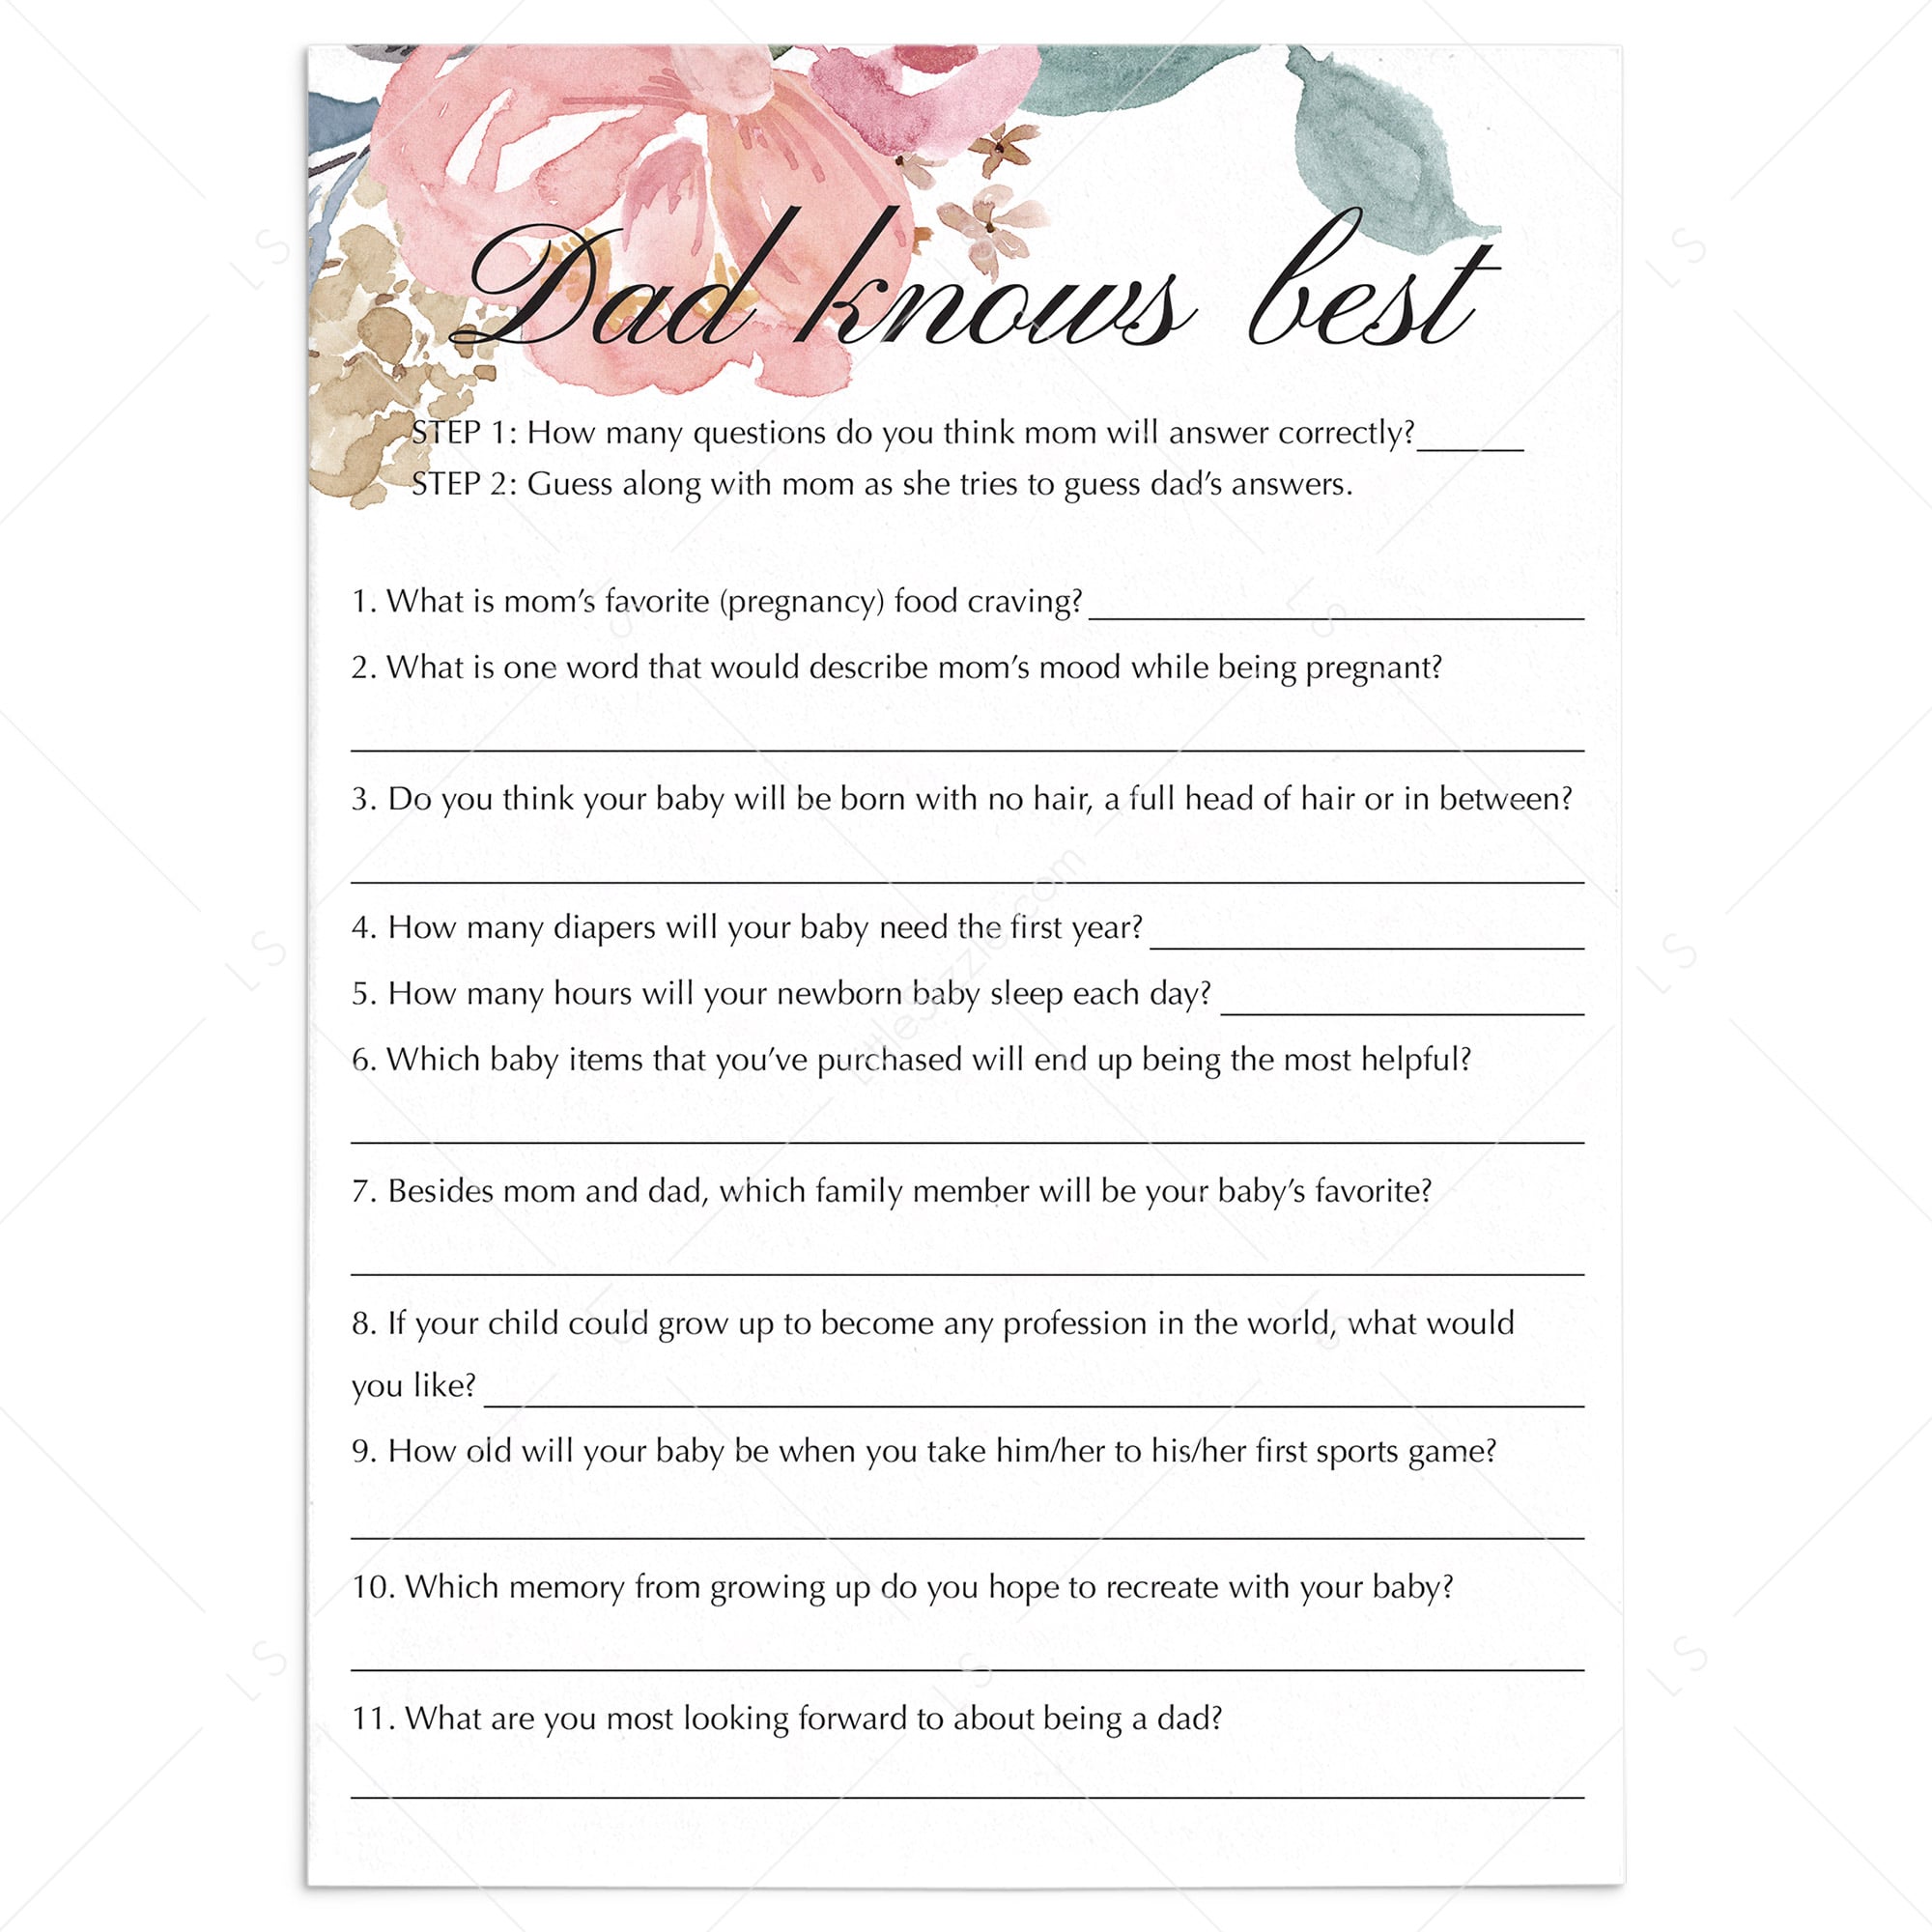 Dad knows best baby shower game printable floral theme